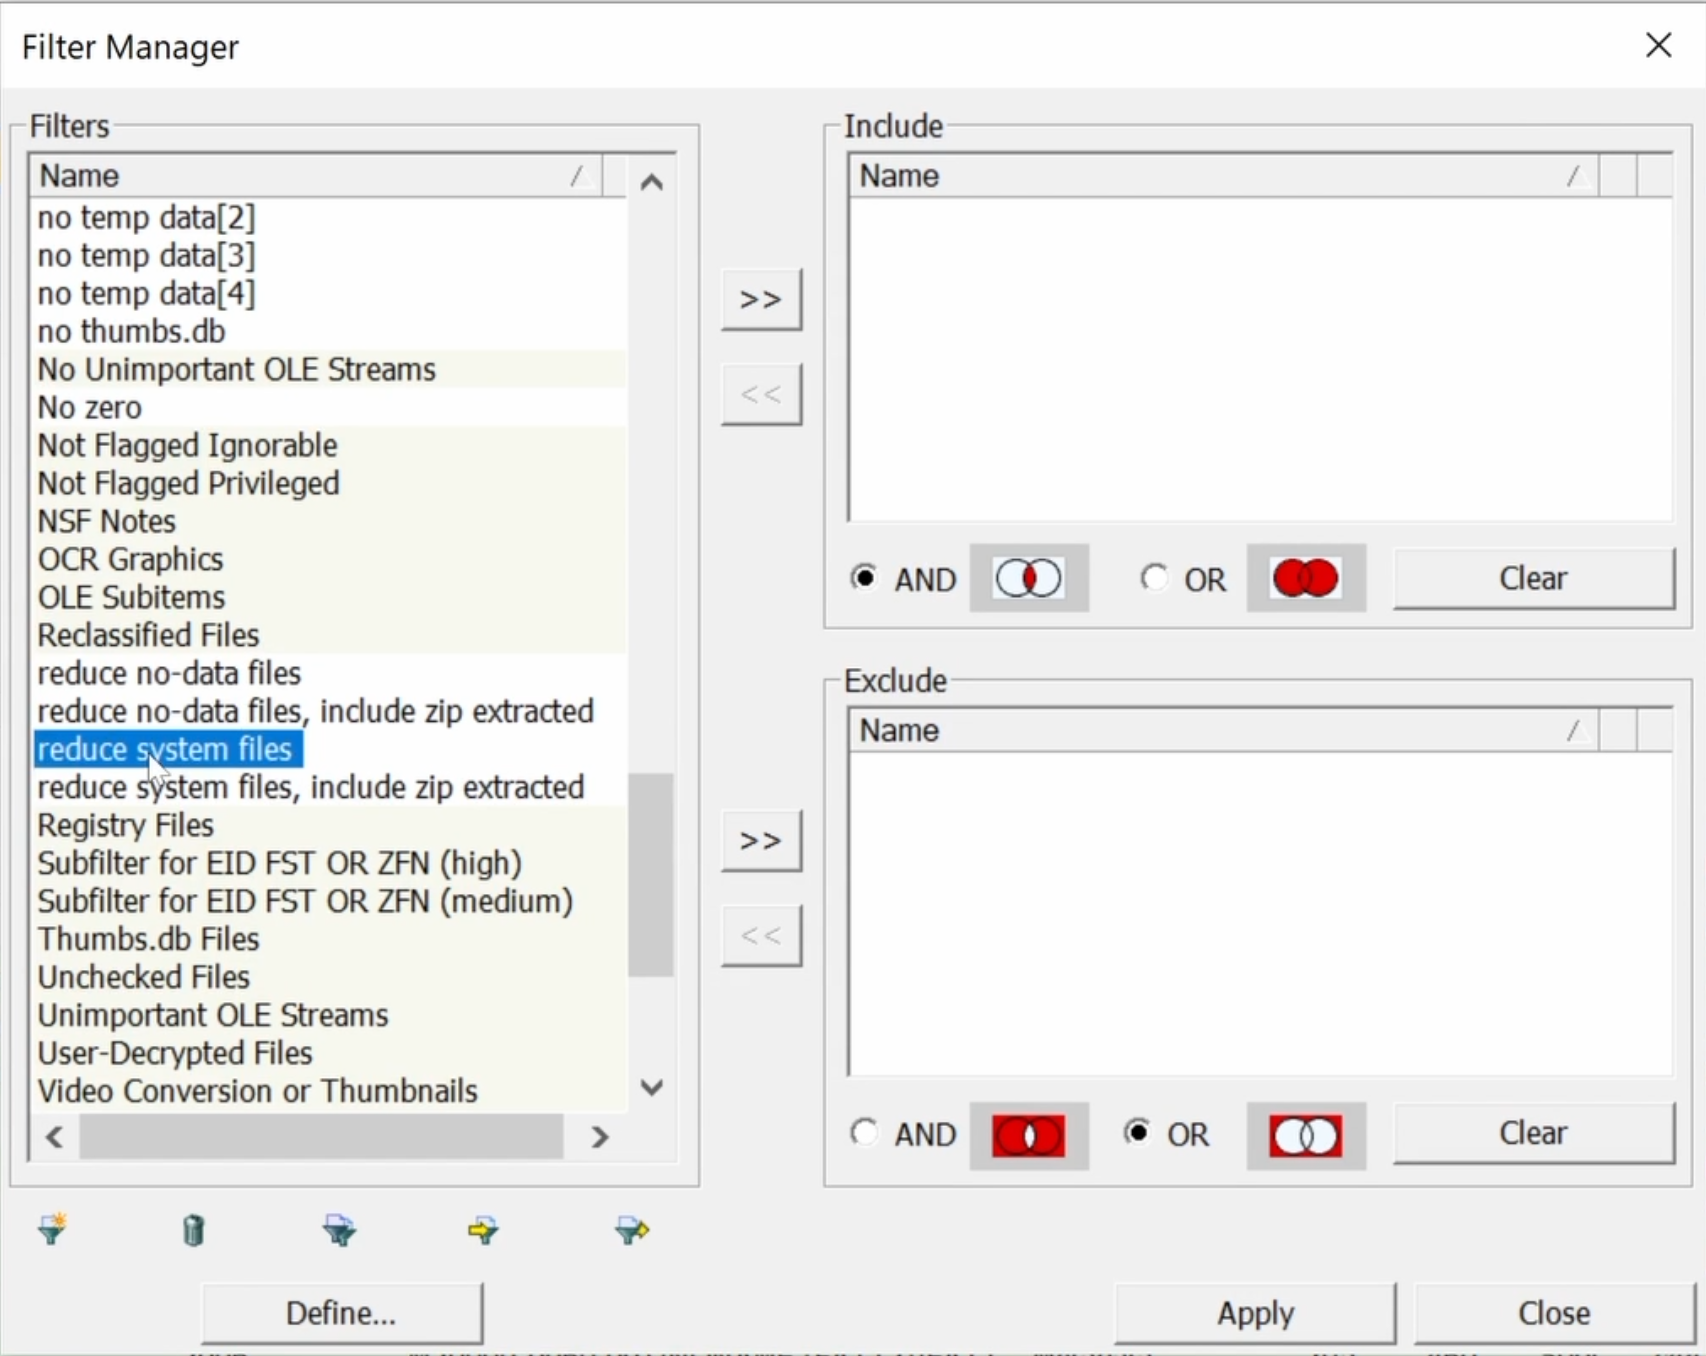 Filter Manager window with reduce system files filter highlighted